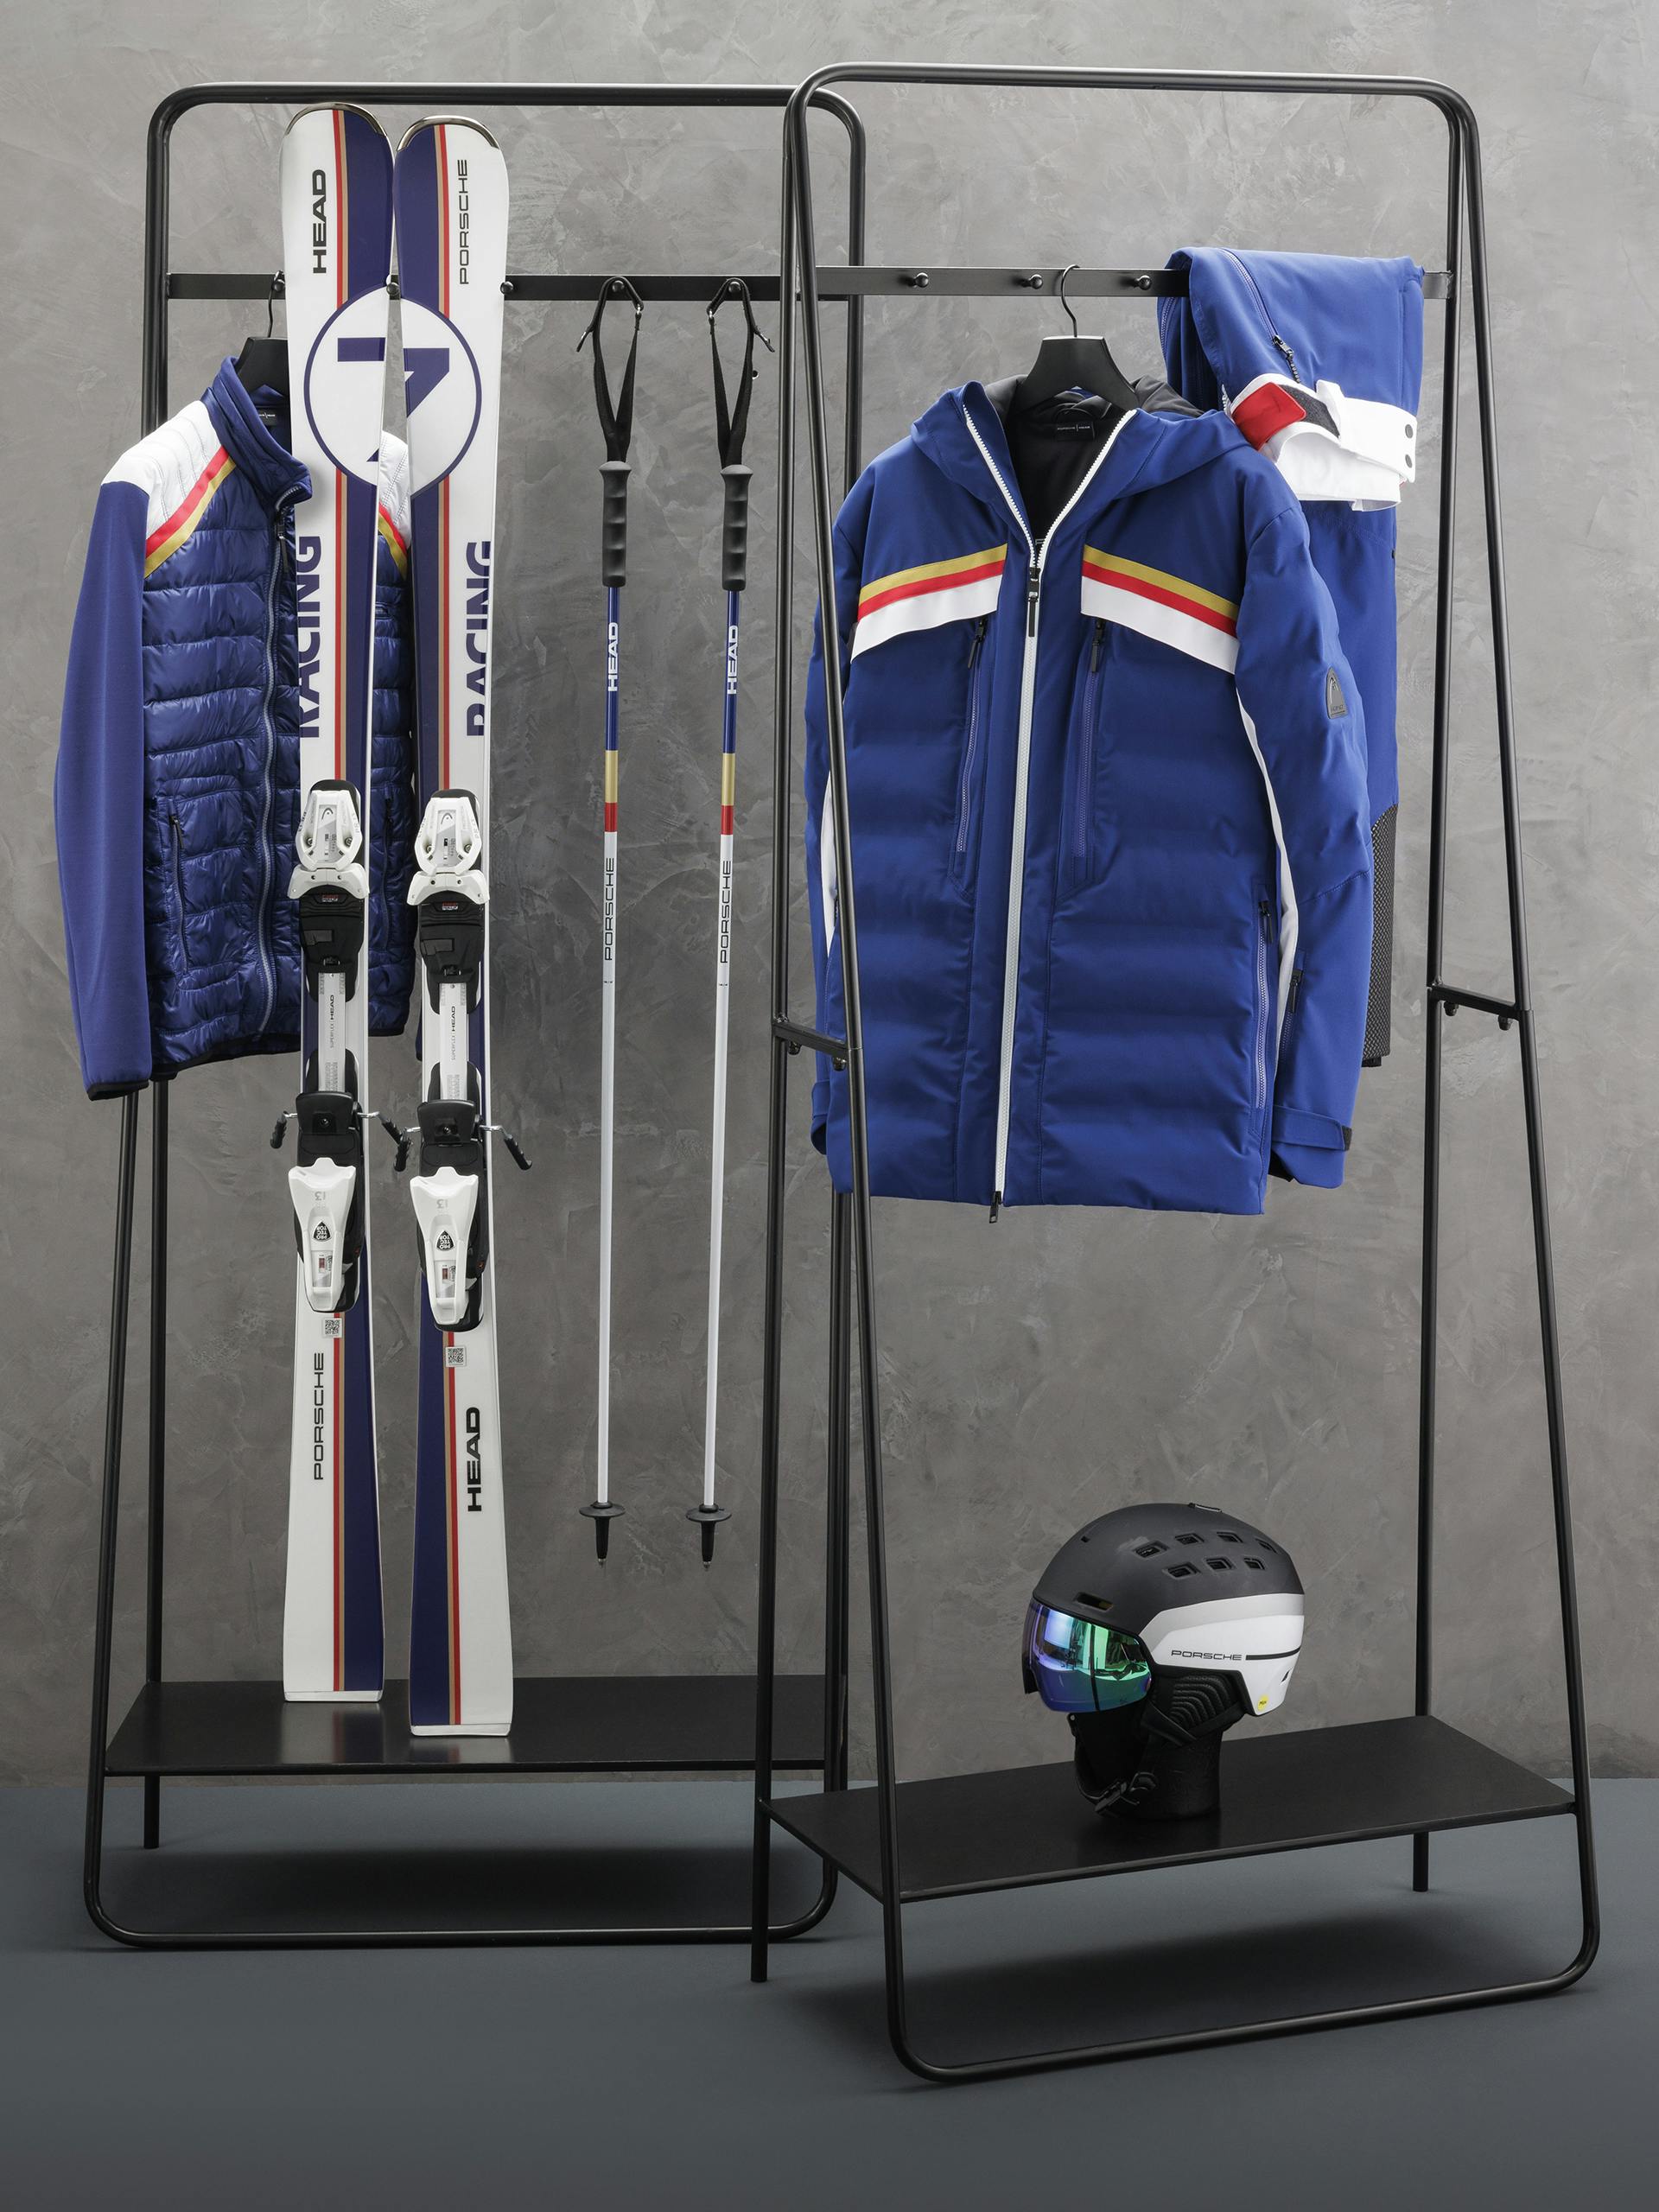 Various products from the new Porsche HEAD Ski collection 2023 pictured hanging on two small clothing racks against a plain grey background.